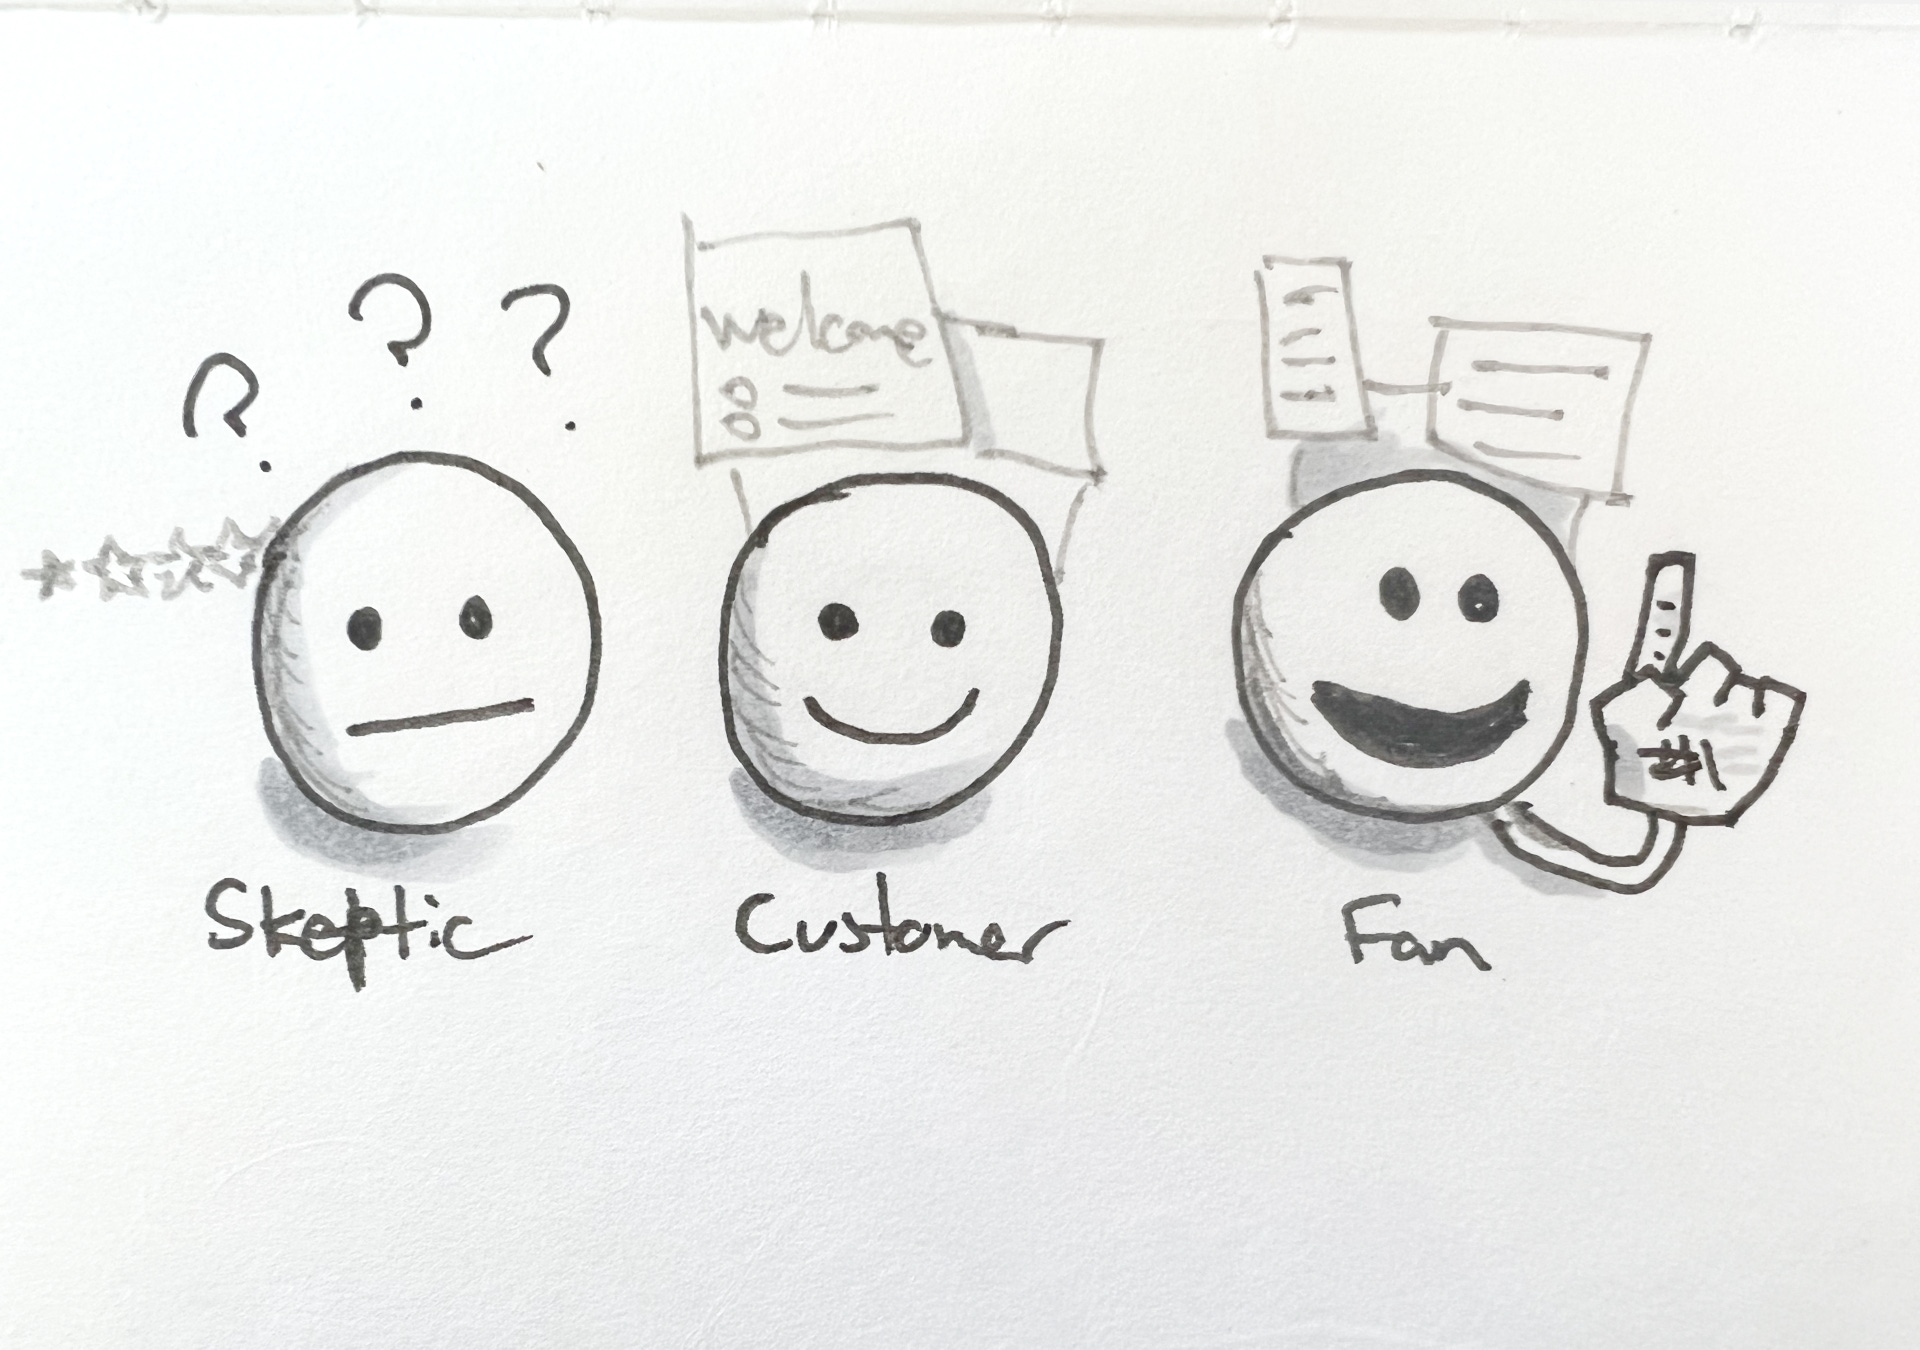 Drawing of people as circle faces depicting the cake-tic, customer and fan